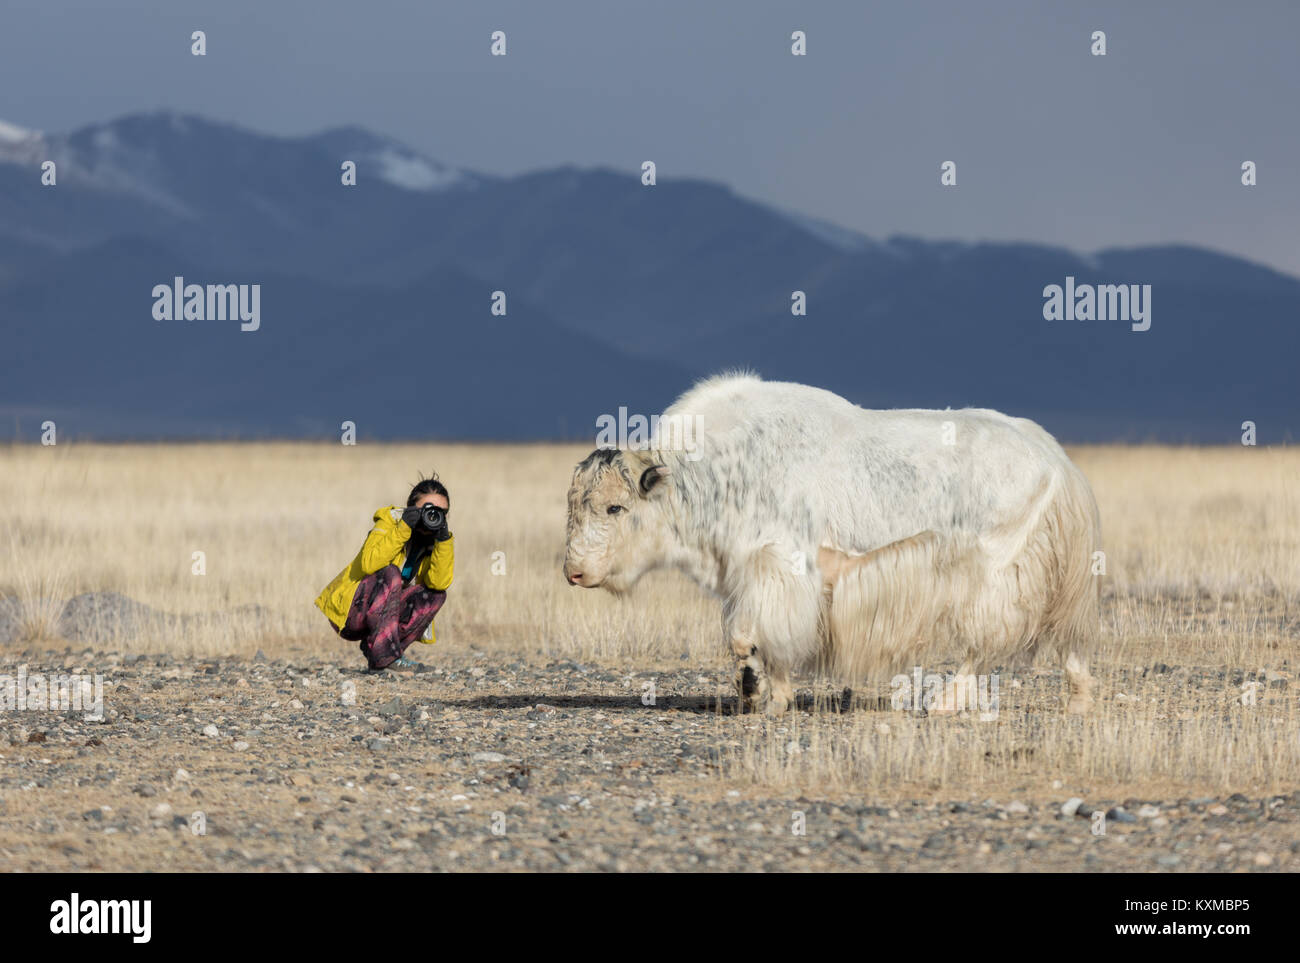 Girl takes pictures white yak Mongolia steppes grasslands plains winter Mongolian cow bull Stock Photo